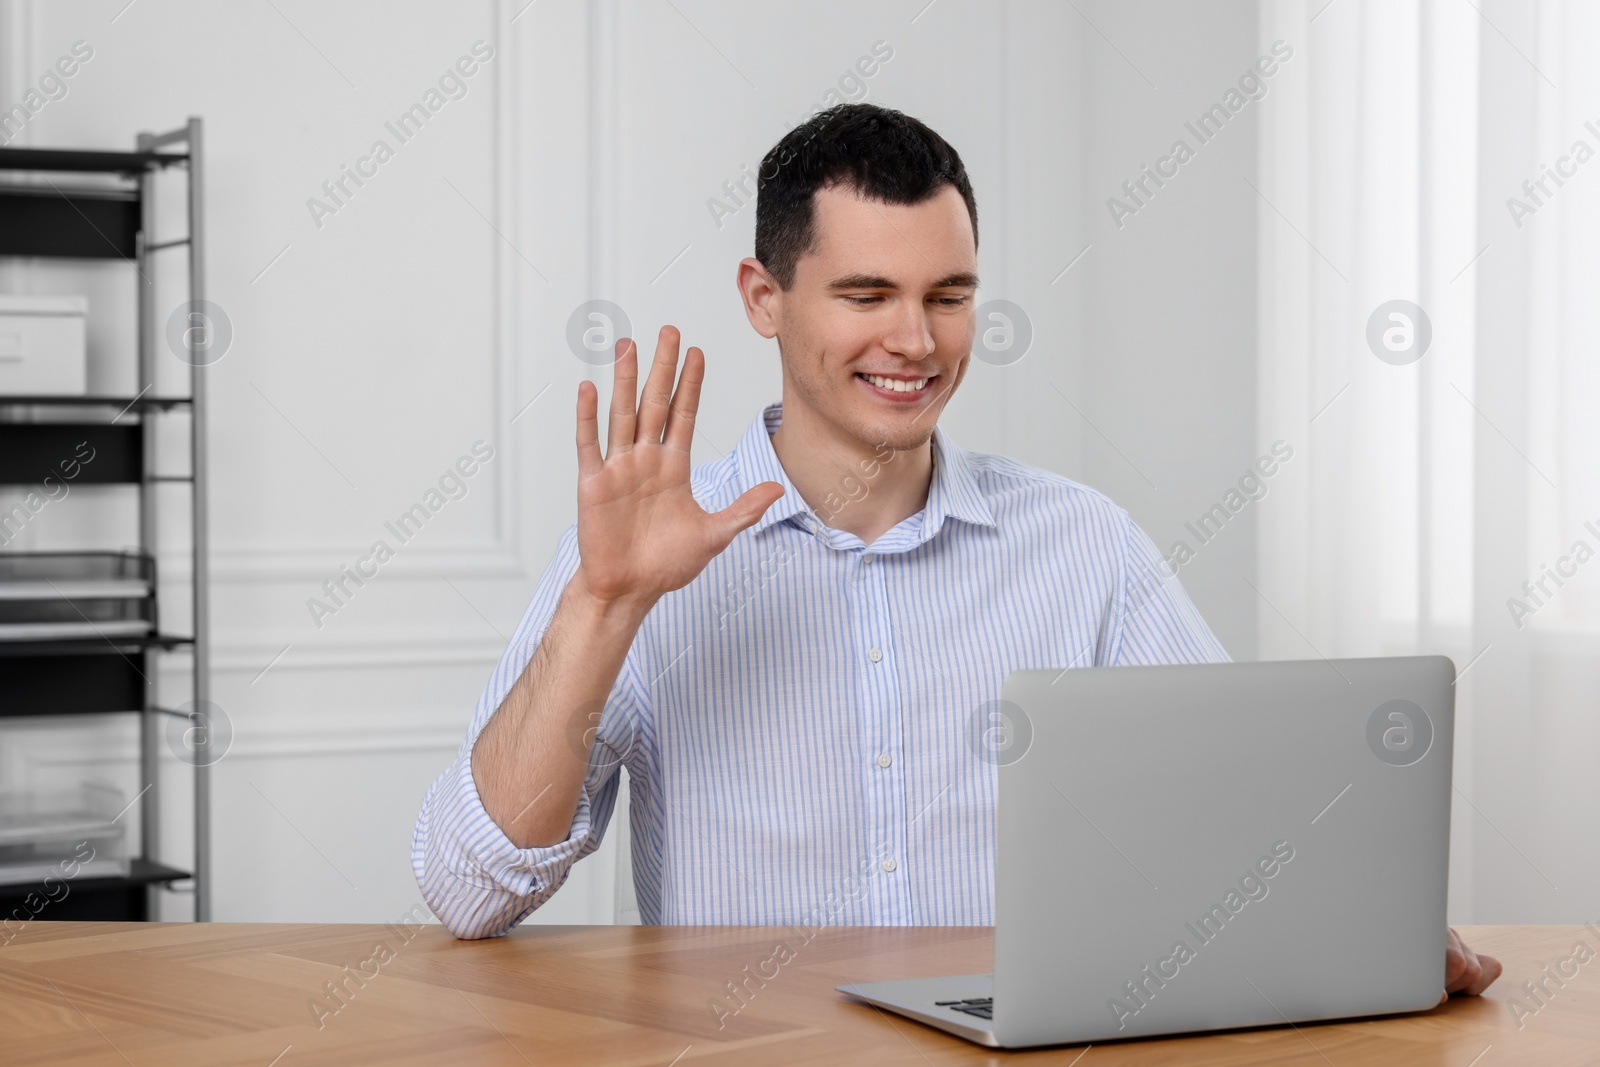 Photo of Man waving hello while having video chat on laptop in office